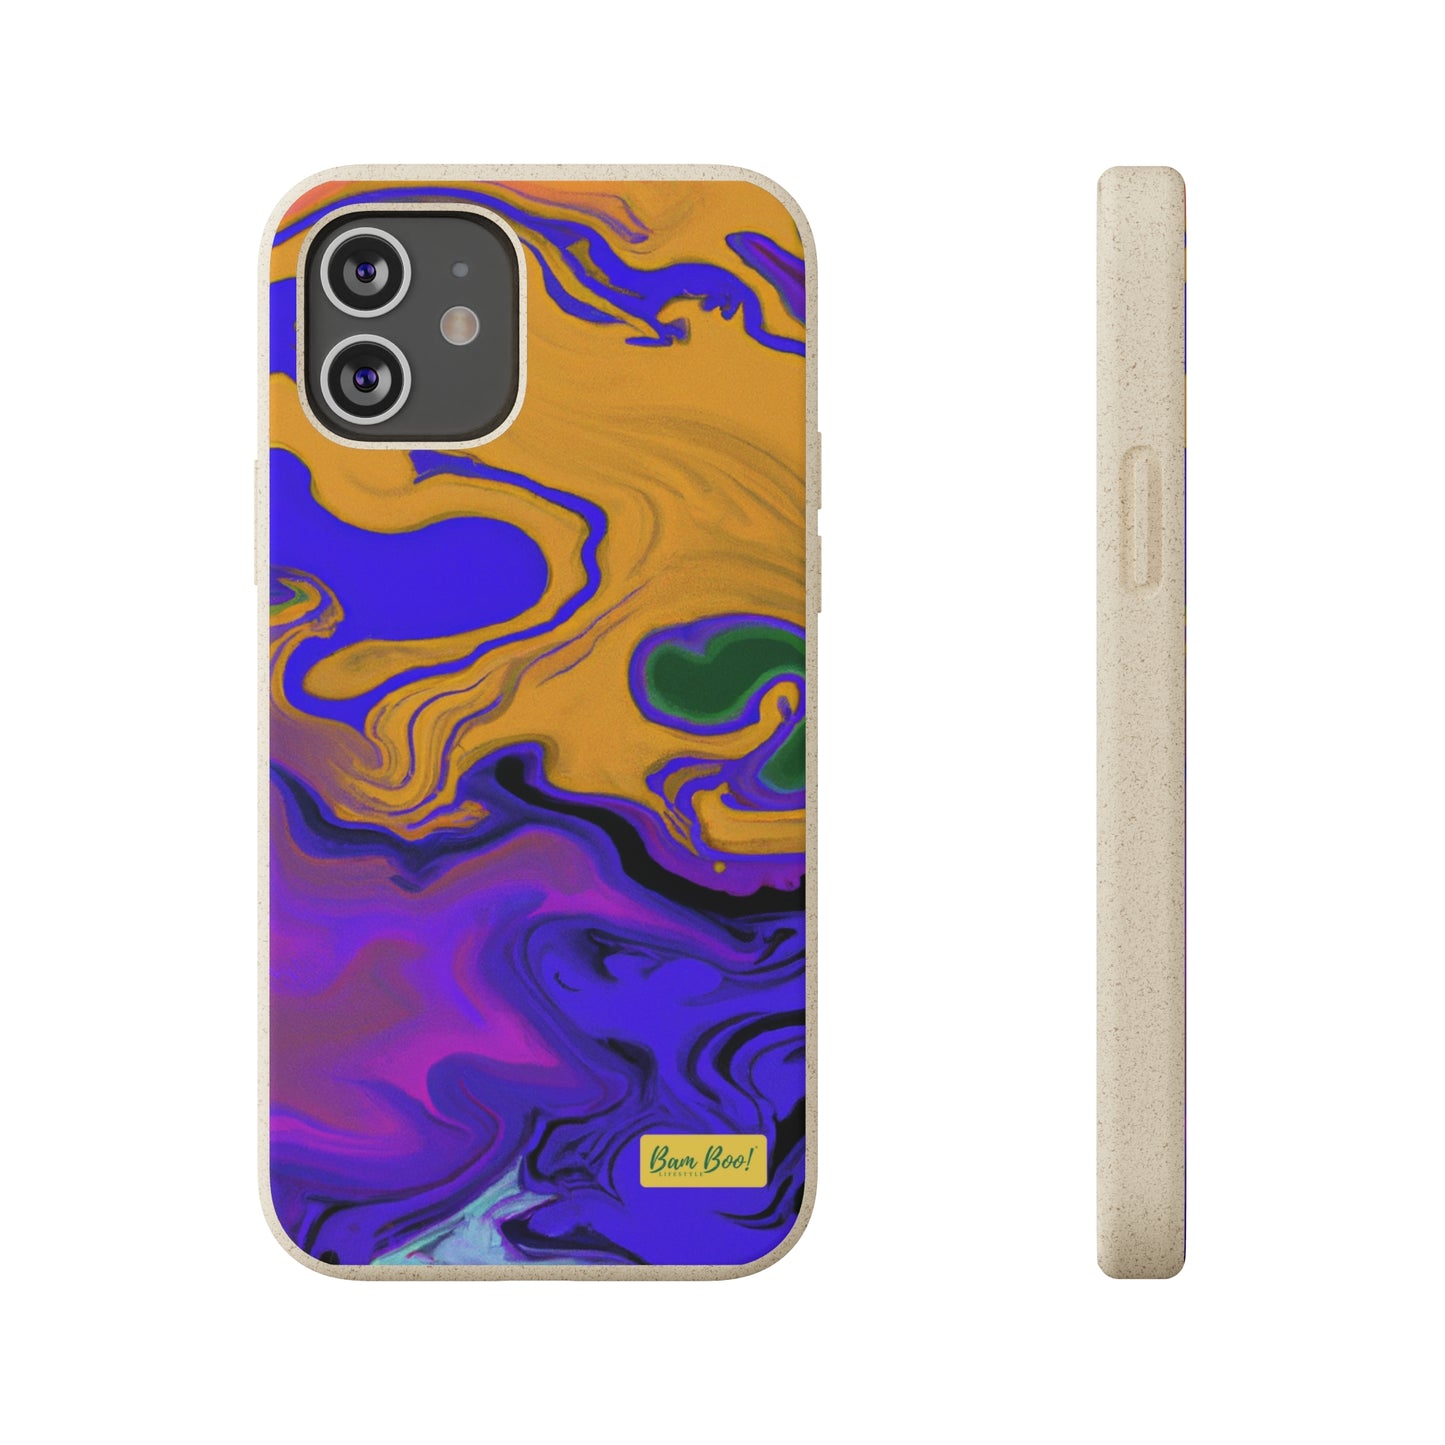 "The Rainbow of My Imagination" - Bam Boo! Lifestyle Eco-friendly Cases